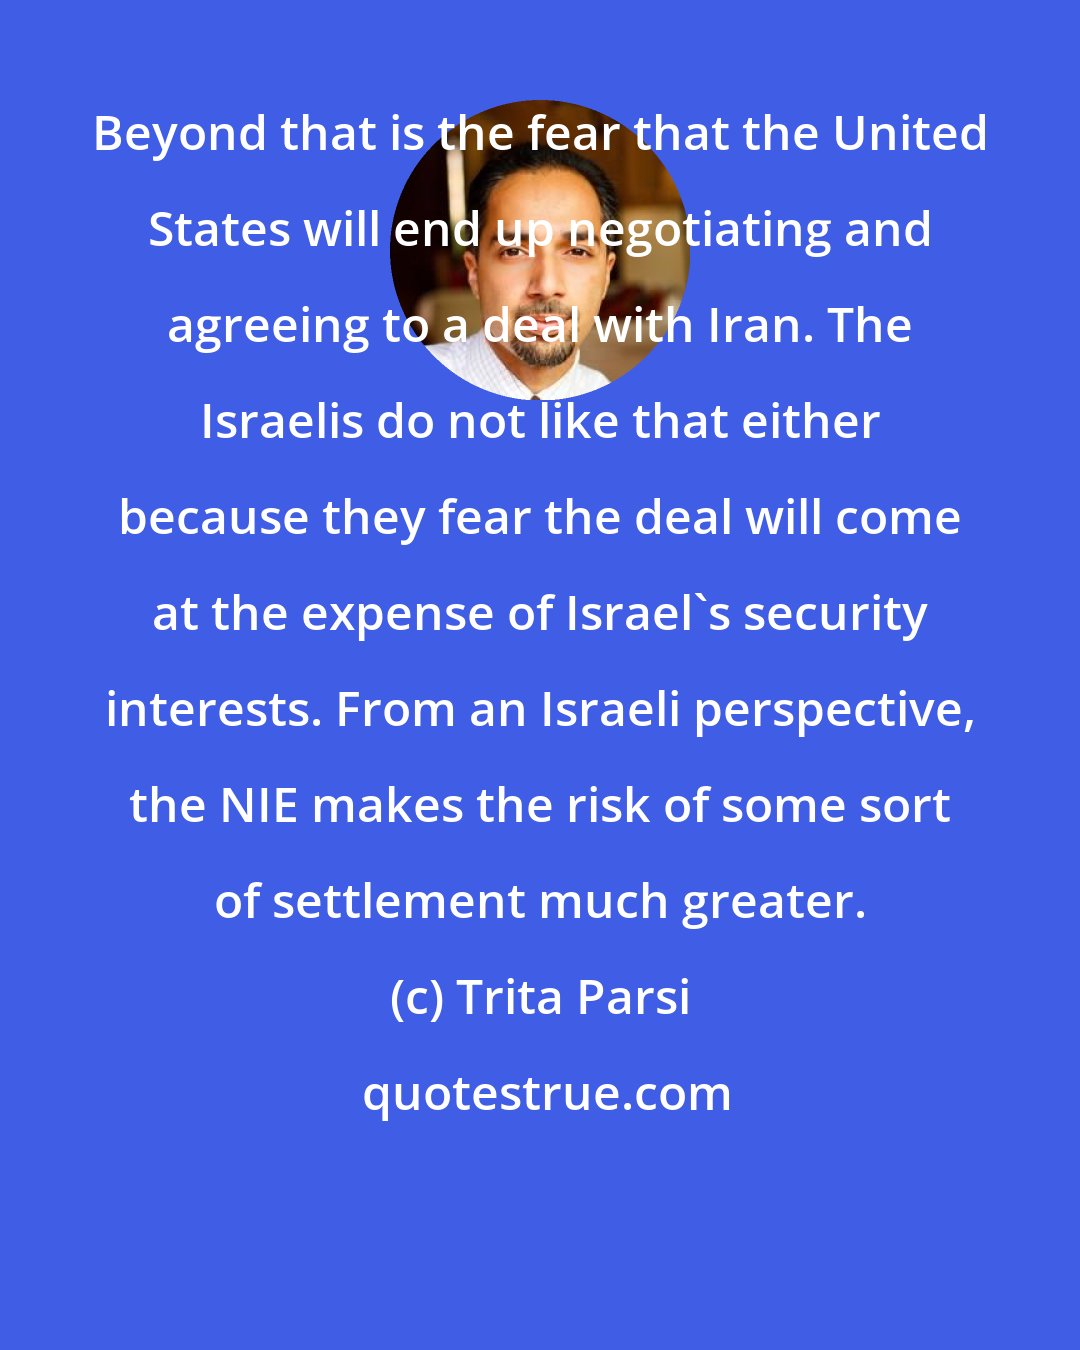 Trita Parsi: Beyond that is the fear that the United States will end up negotiating and agreeing to a deal with Iran. The Israelis do not like that either because they fear the deal will come at the expense of Israel's security interests. From an Israeli perspective, the NIE makes the risk of some sort of settlement much greater.